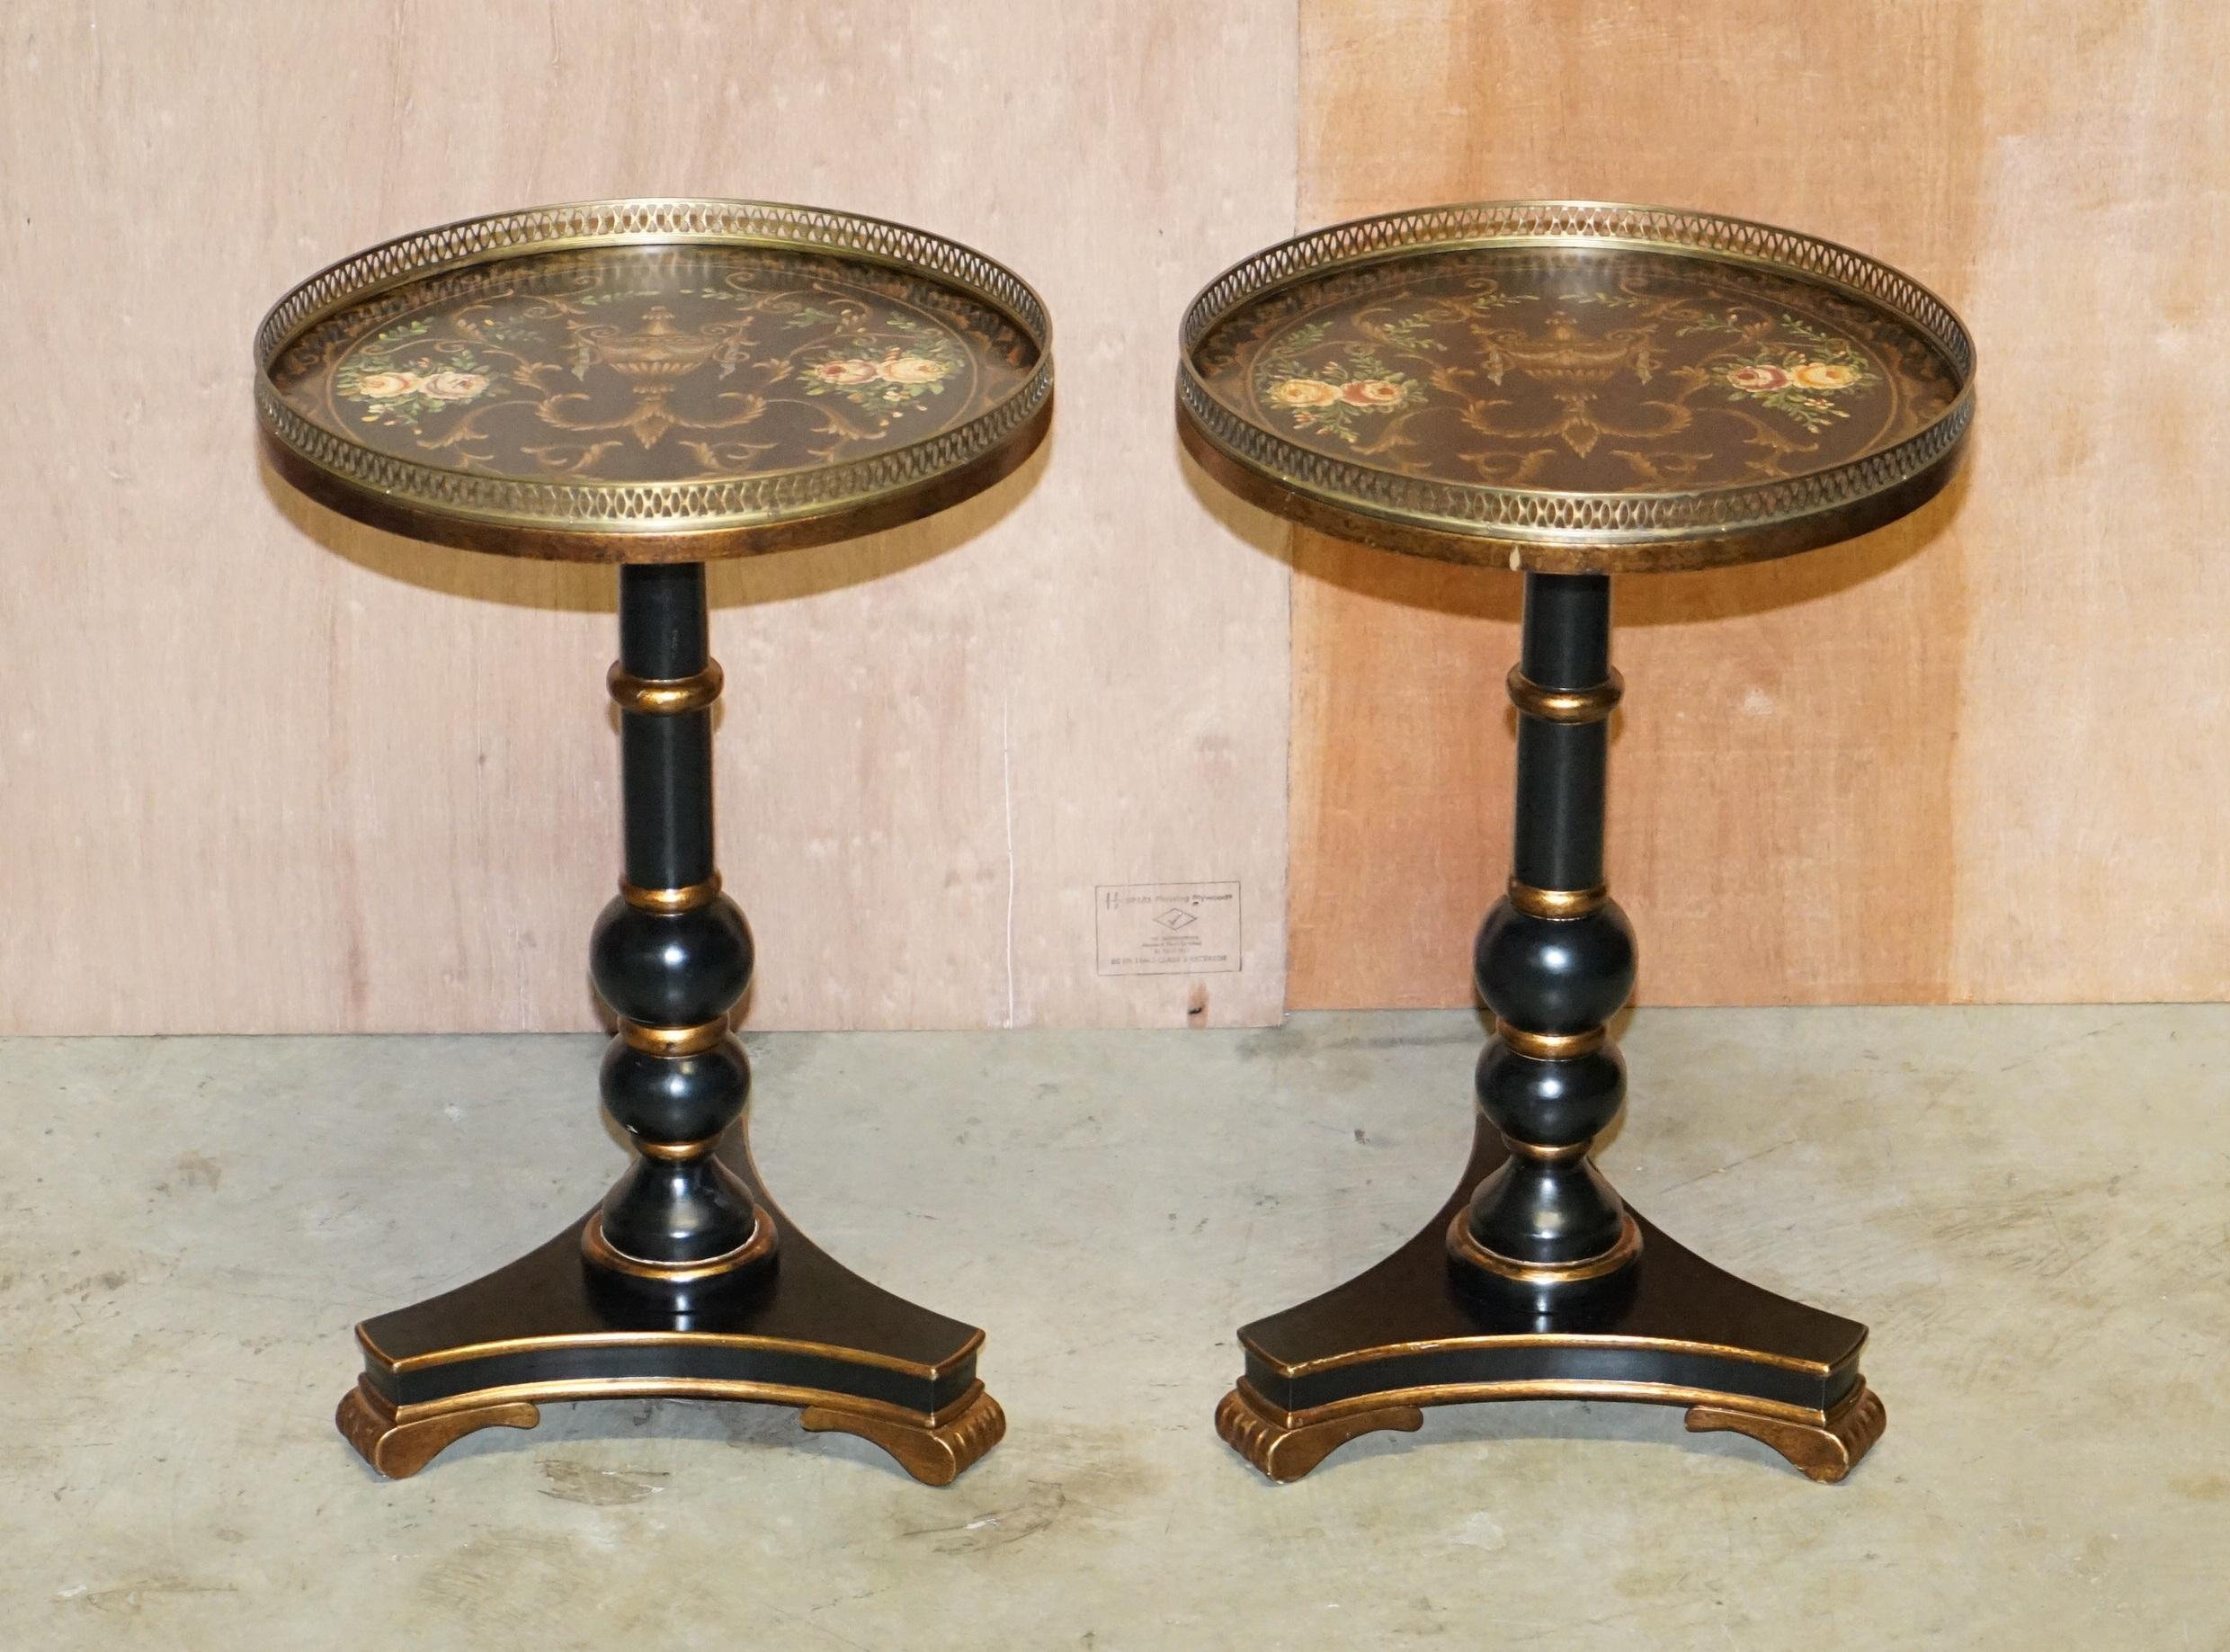 We are delighted to offer for sale this stunning pair of hand painted tilt top side tables with brass gallery rails

A very good looking and decorative pair of side tables, they have brass gallery rails which were popularised in the Regency era,